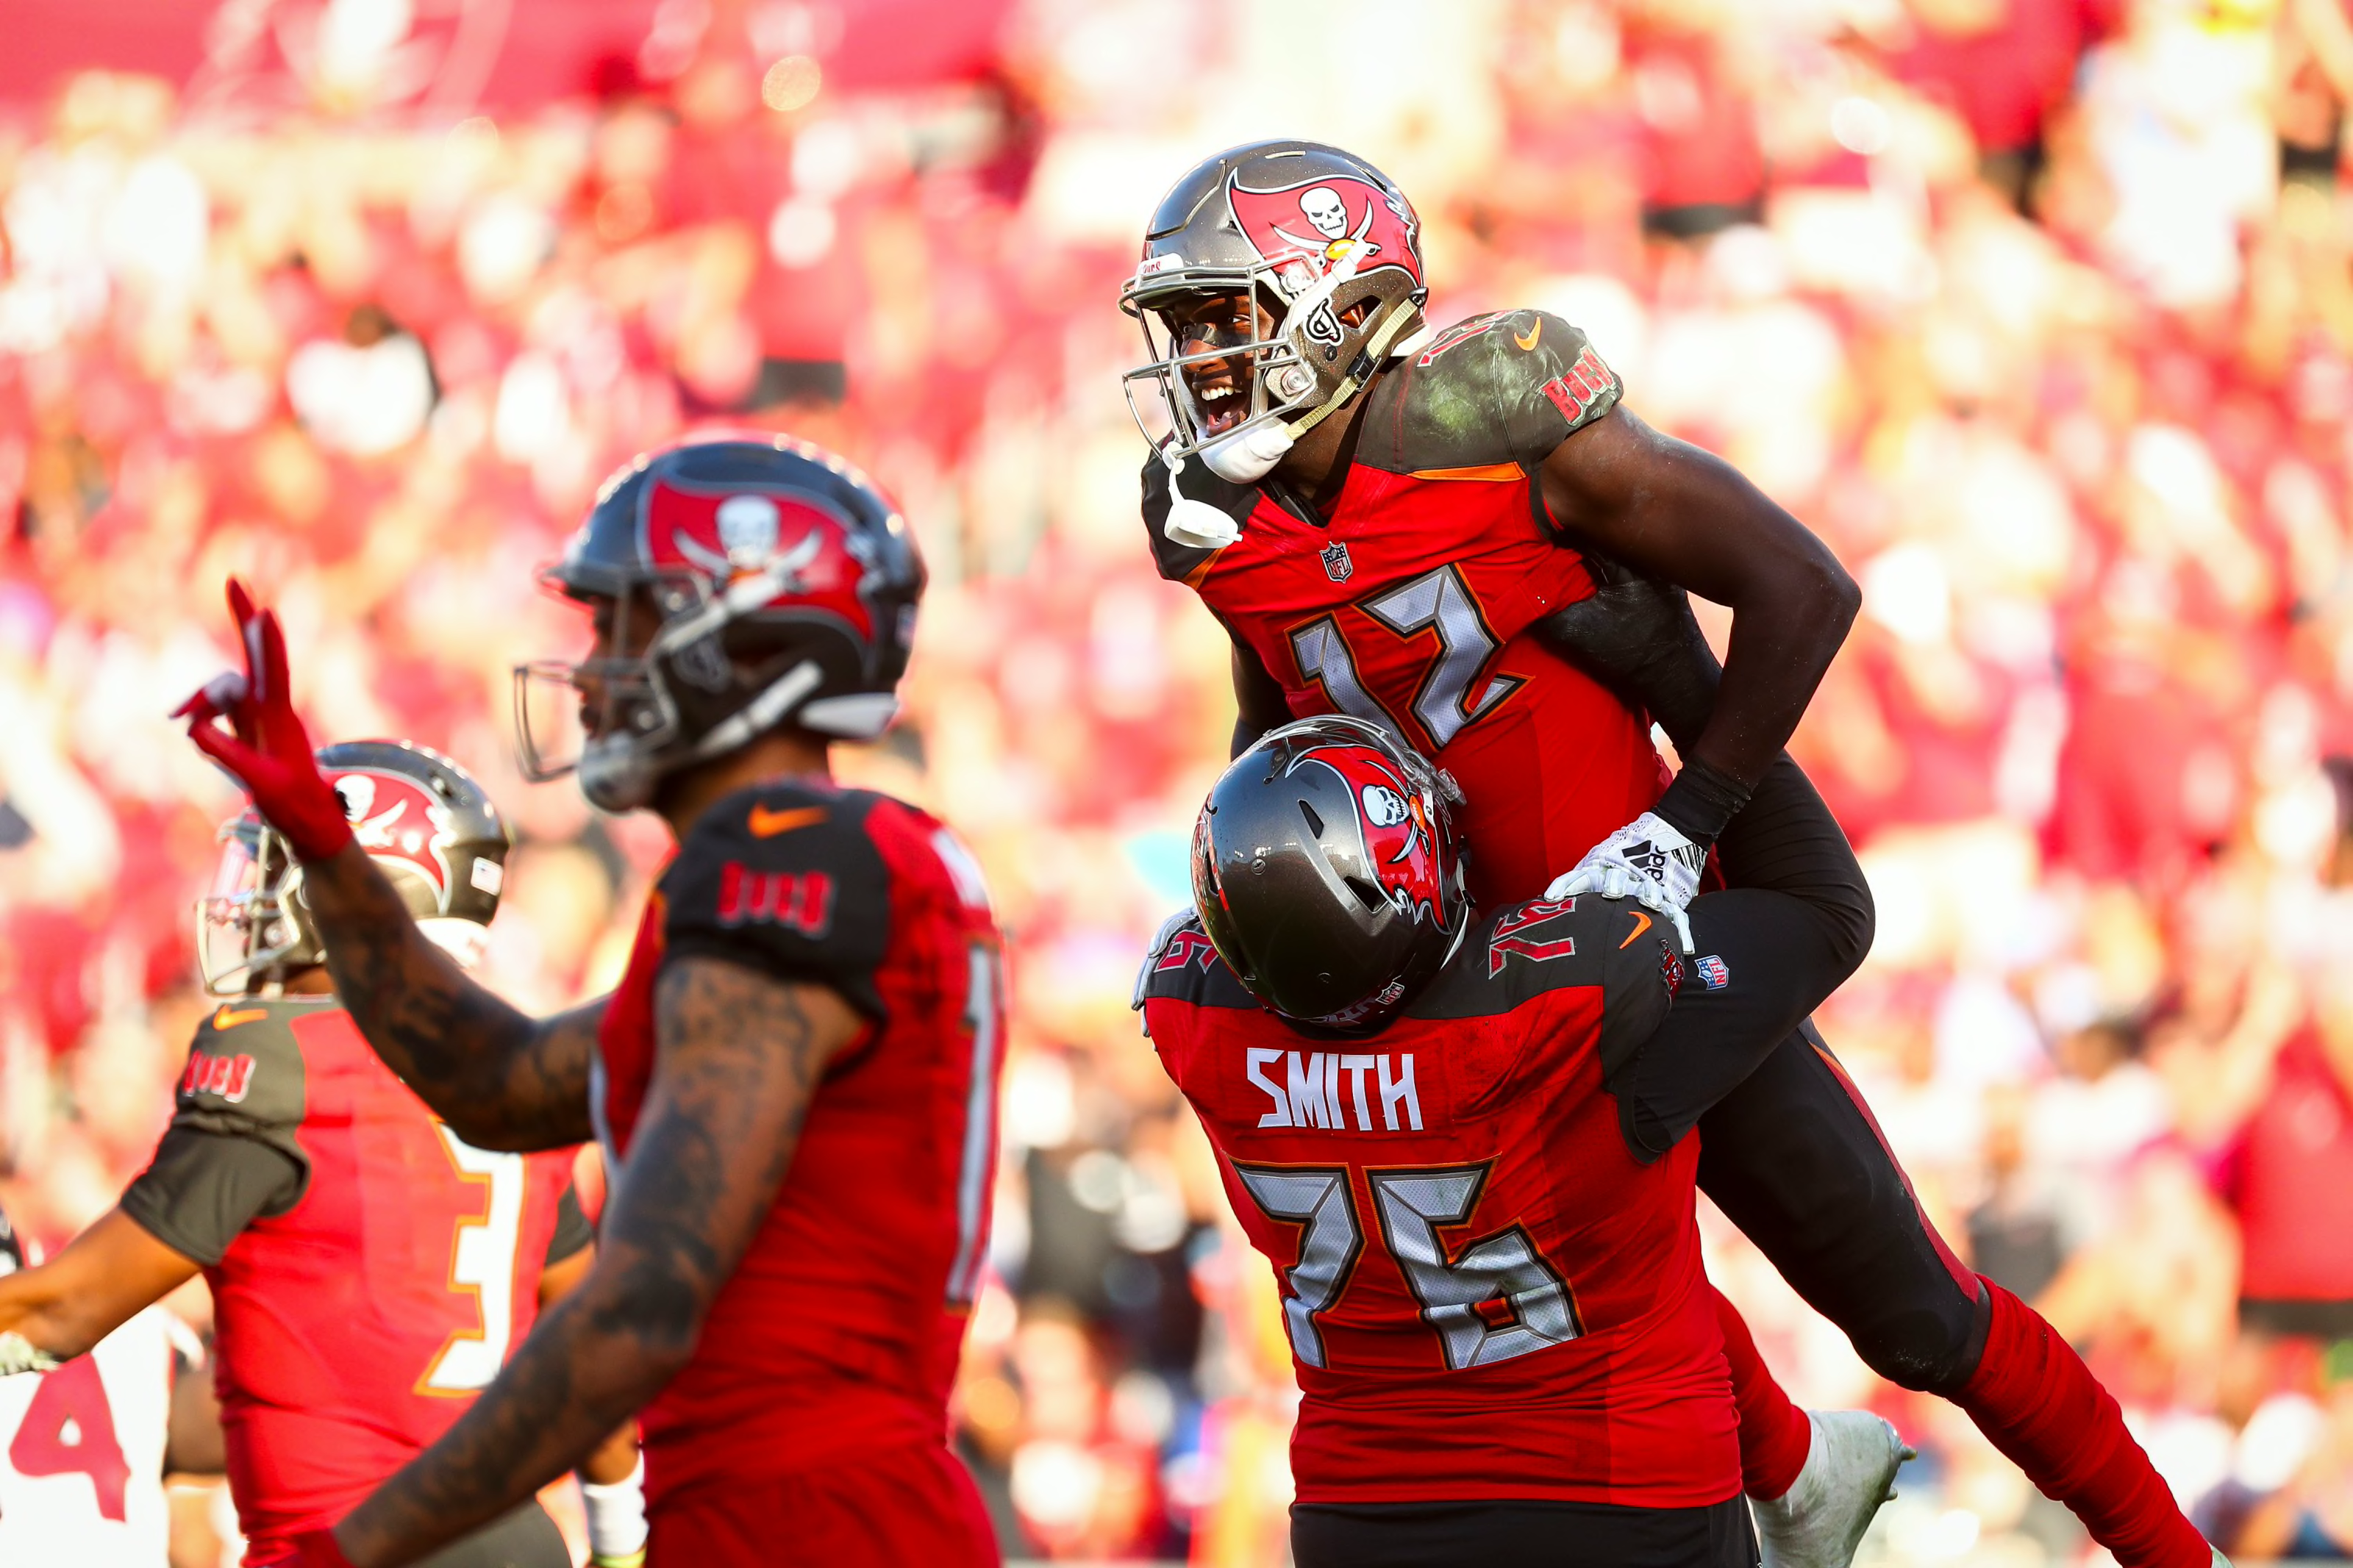 Potential trade-up targets for the Tampa Bay Buccaneers in 2020 NFL Draft